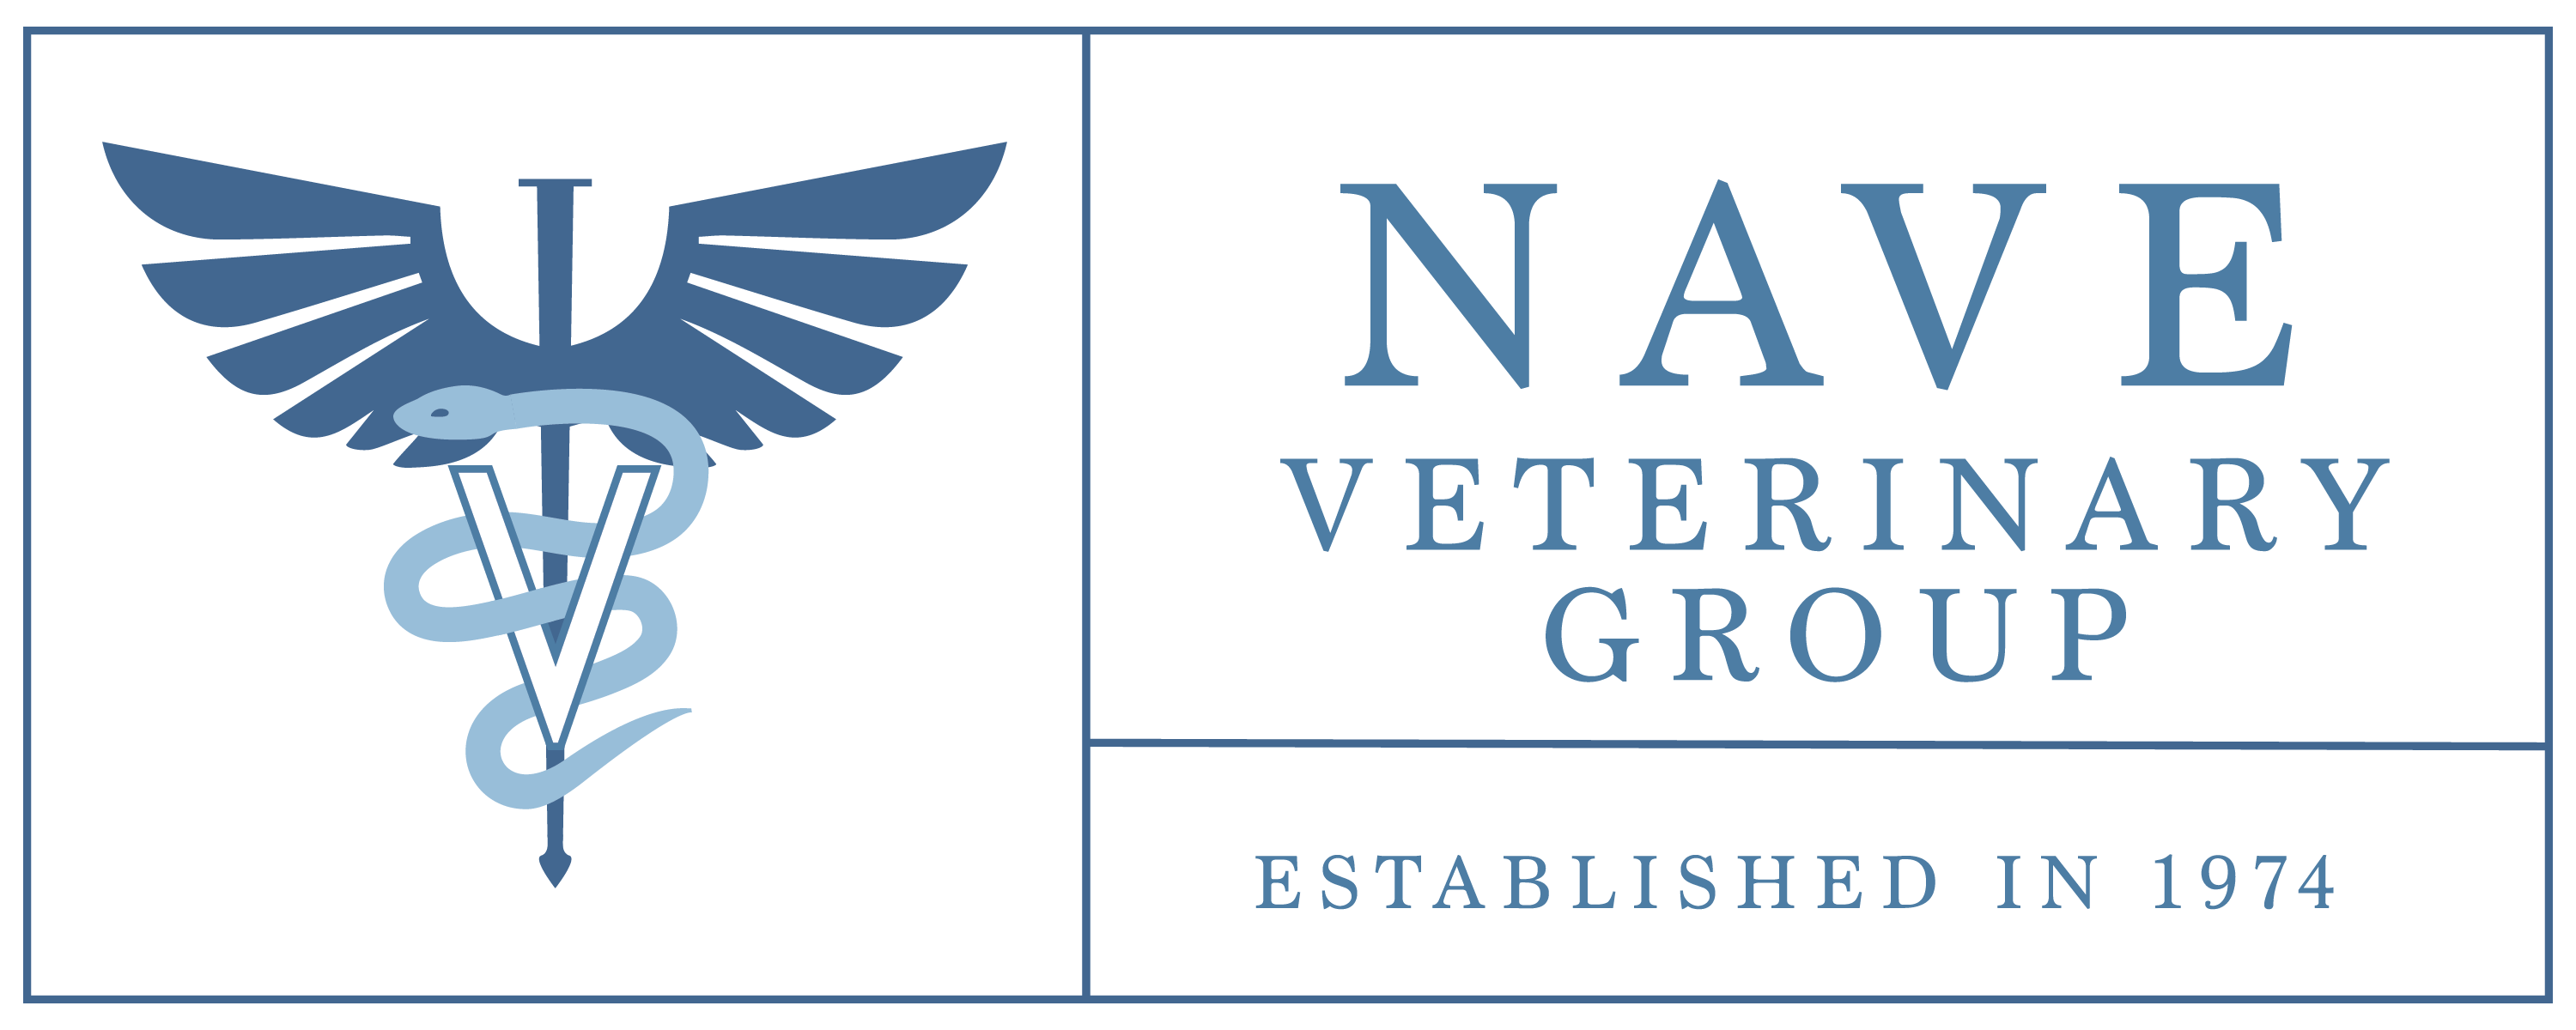 NAVE Veterinary Group